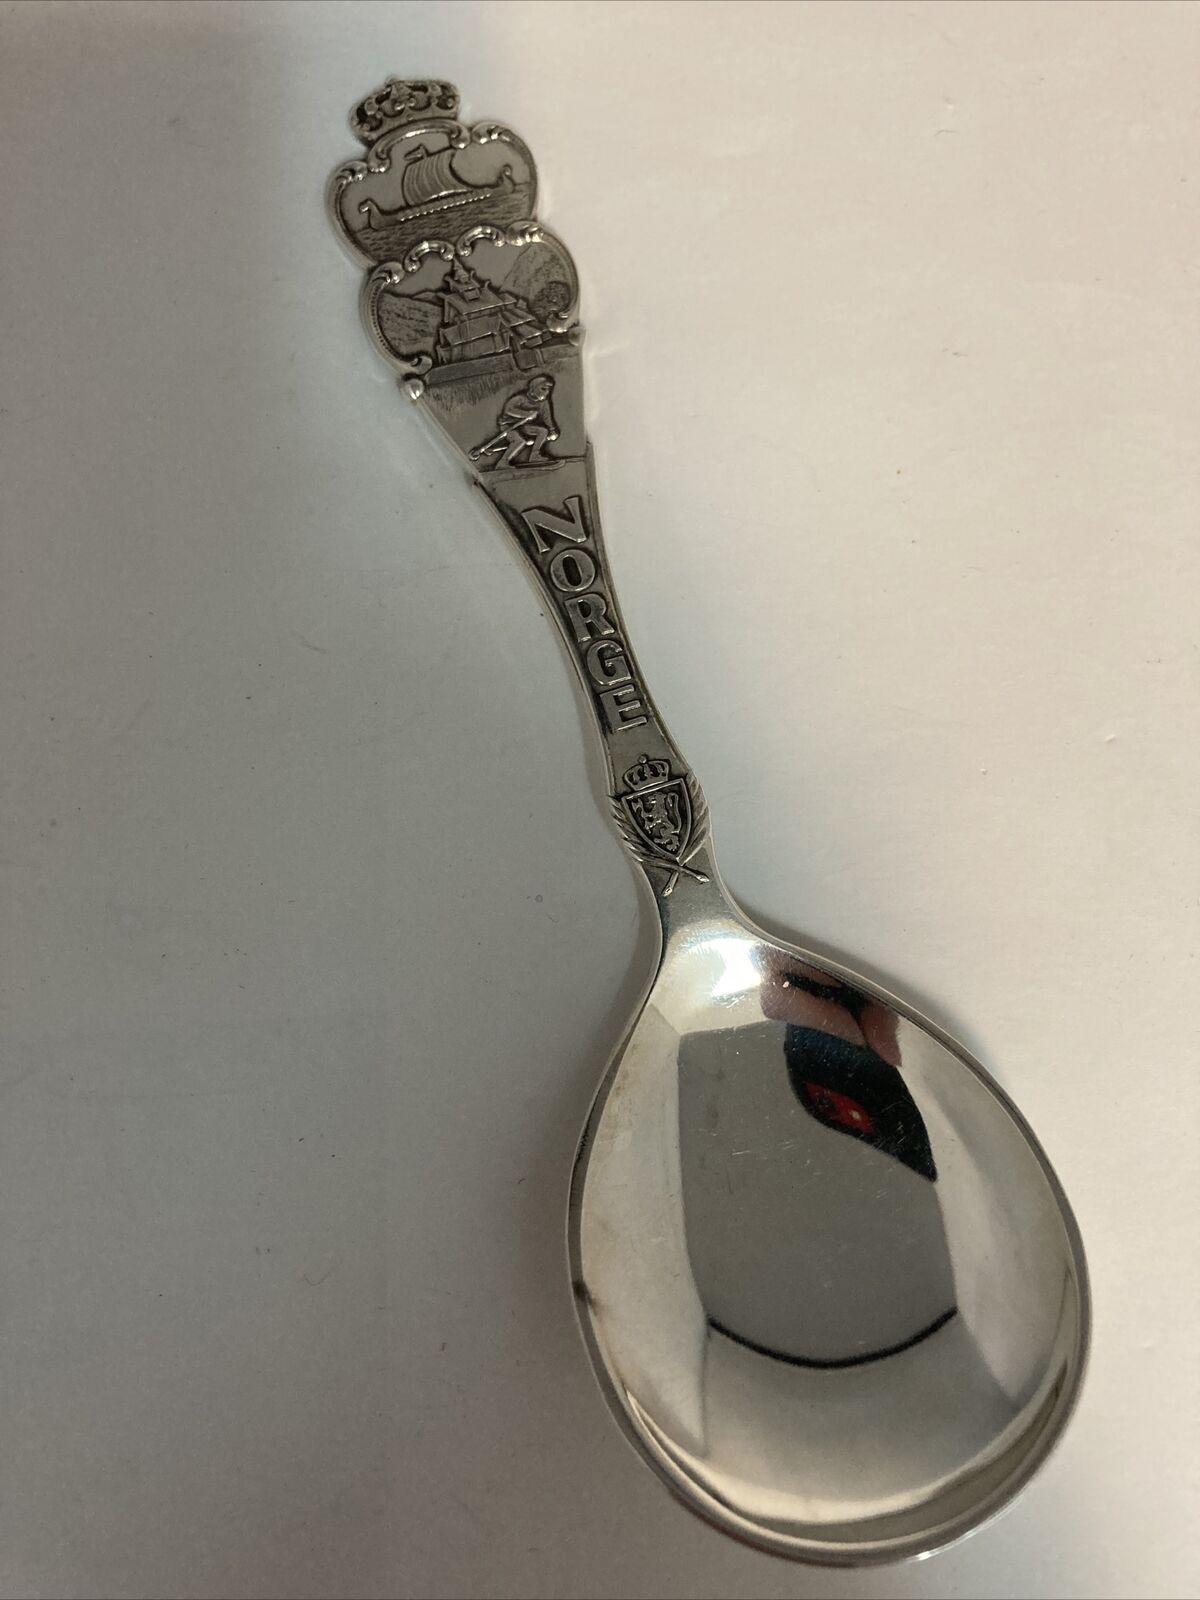 Norway Souvenir Collector Spoon Collectible Viking Boat Skiing 60 GR. NM 6” Long